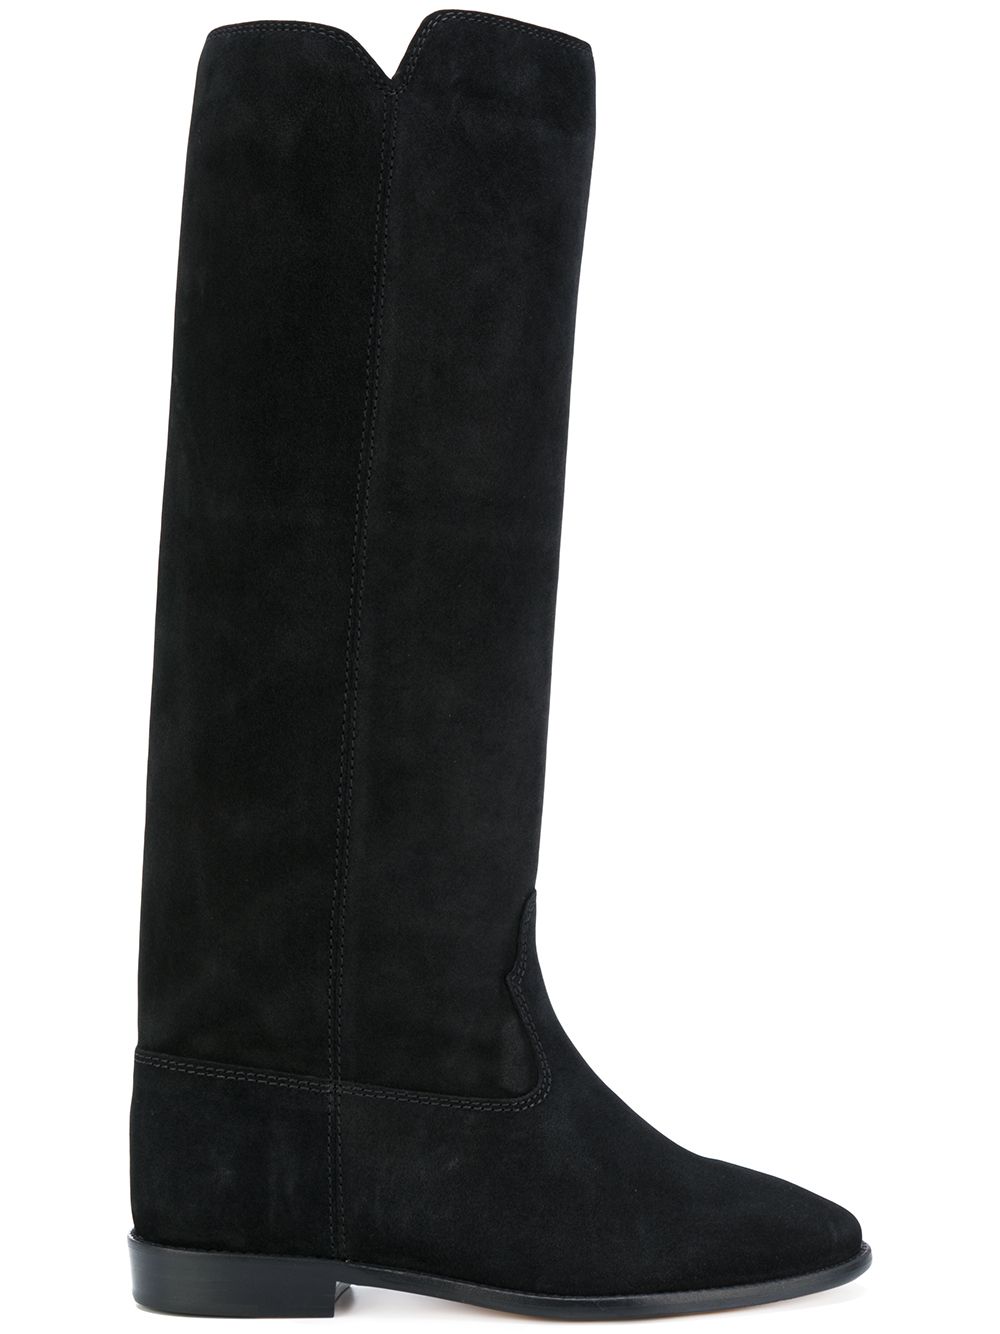 ISABEL MARANT Cleave Boots - Farfetch